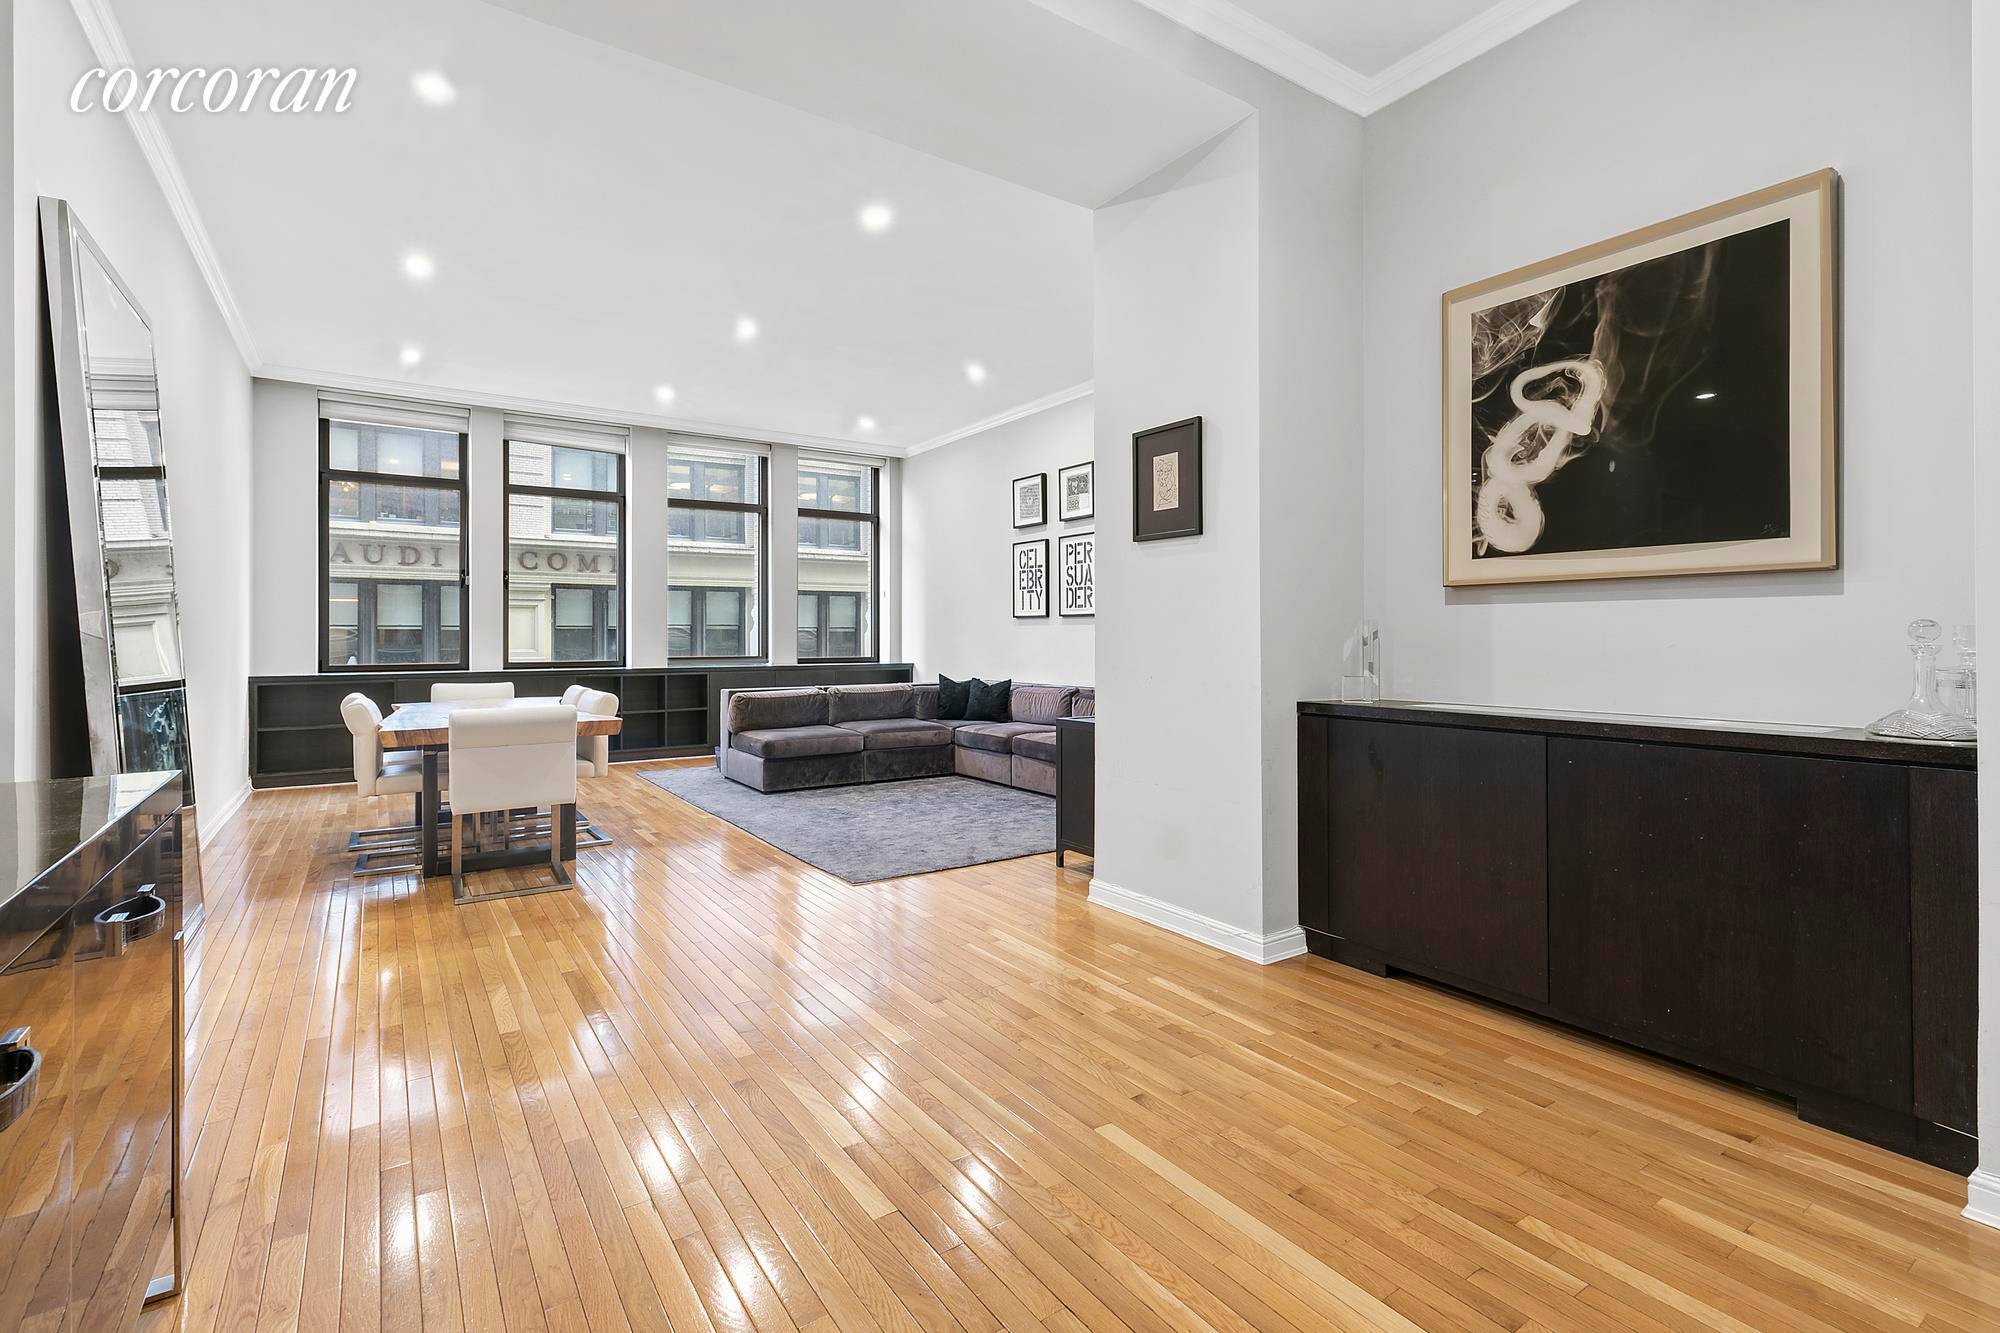 A loft like condo in Chelsea's most desirable building, this 1, 531 square foot two bedroom, two bathroom apartment features hardwood floors, 11 foot ceilings, and oversize windows that flood ...